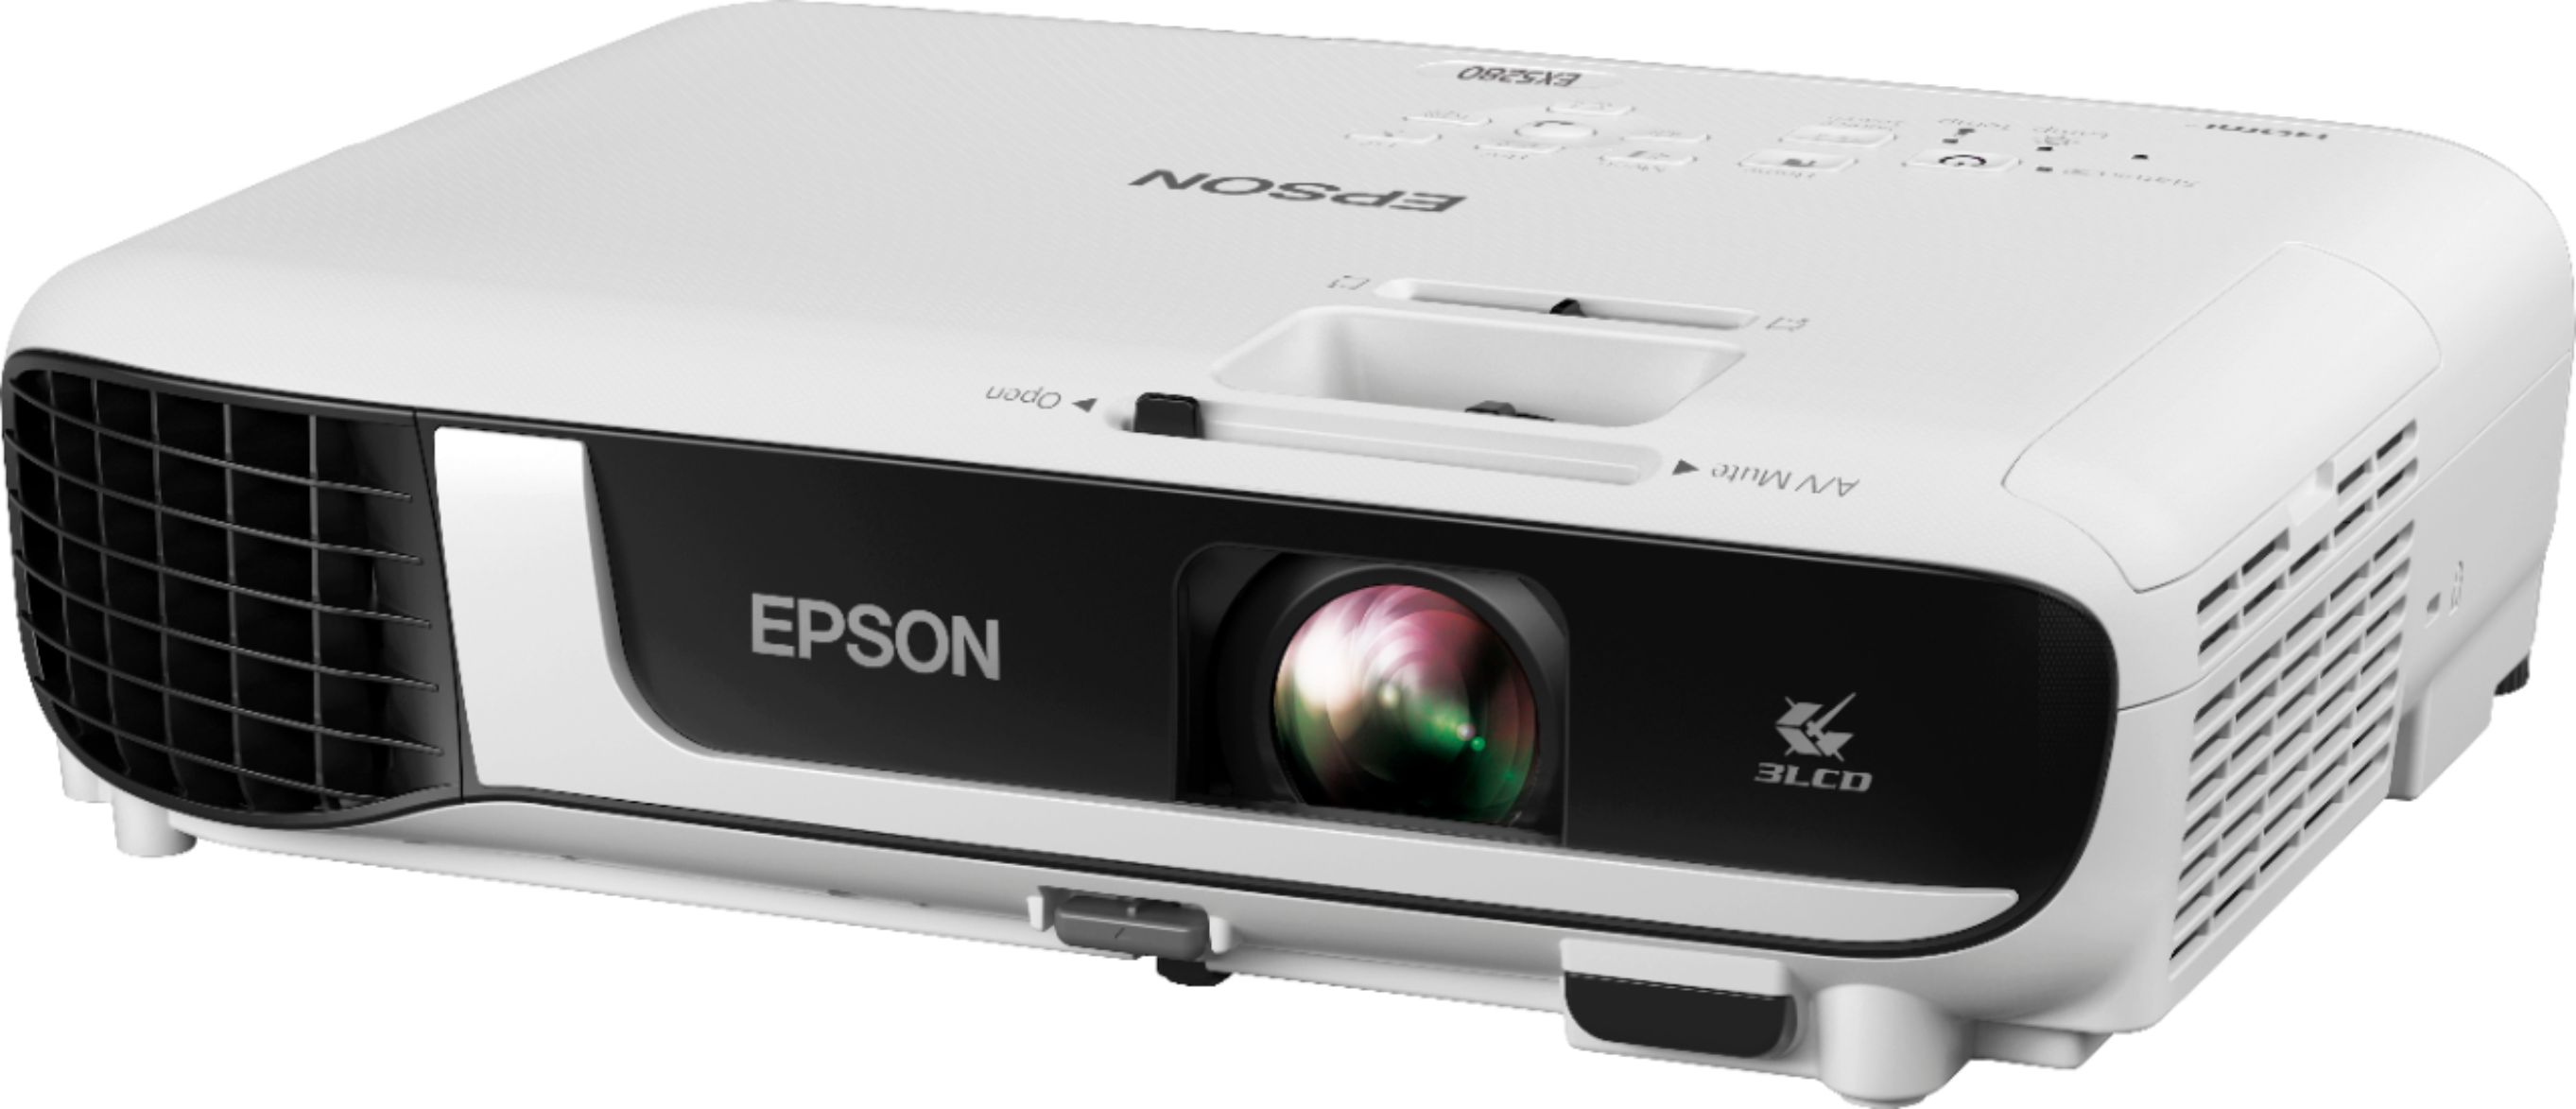 Left View: Epson EX5280 3LCD XGA Projector with Built-in Speaker - White